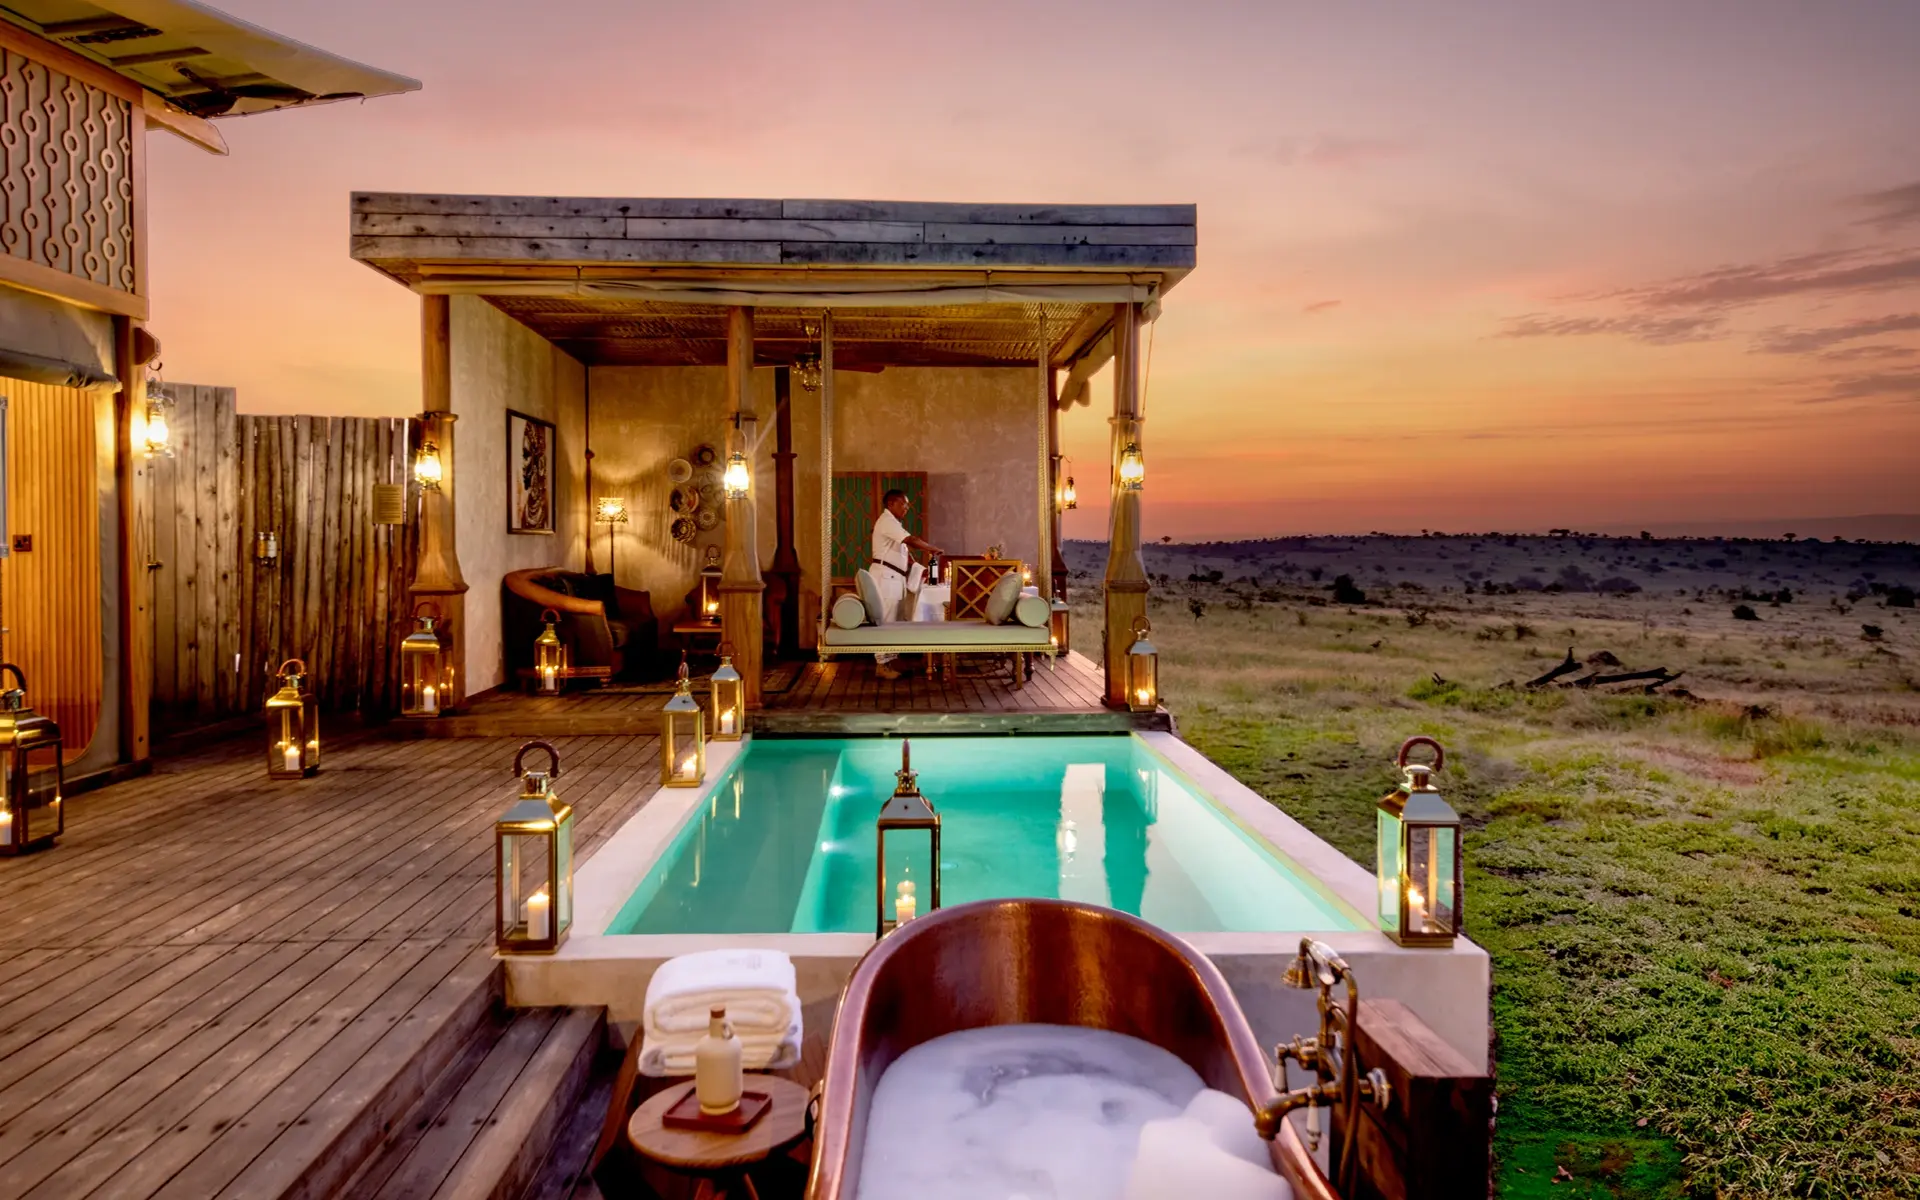 A luxury one-bedroom villa with a private pool, deck, and breathtaking views of the Northern Serengeti at One Nature Mara River.